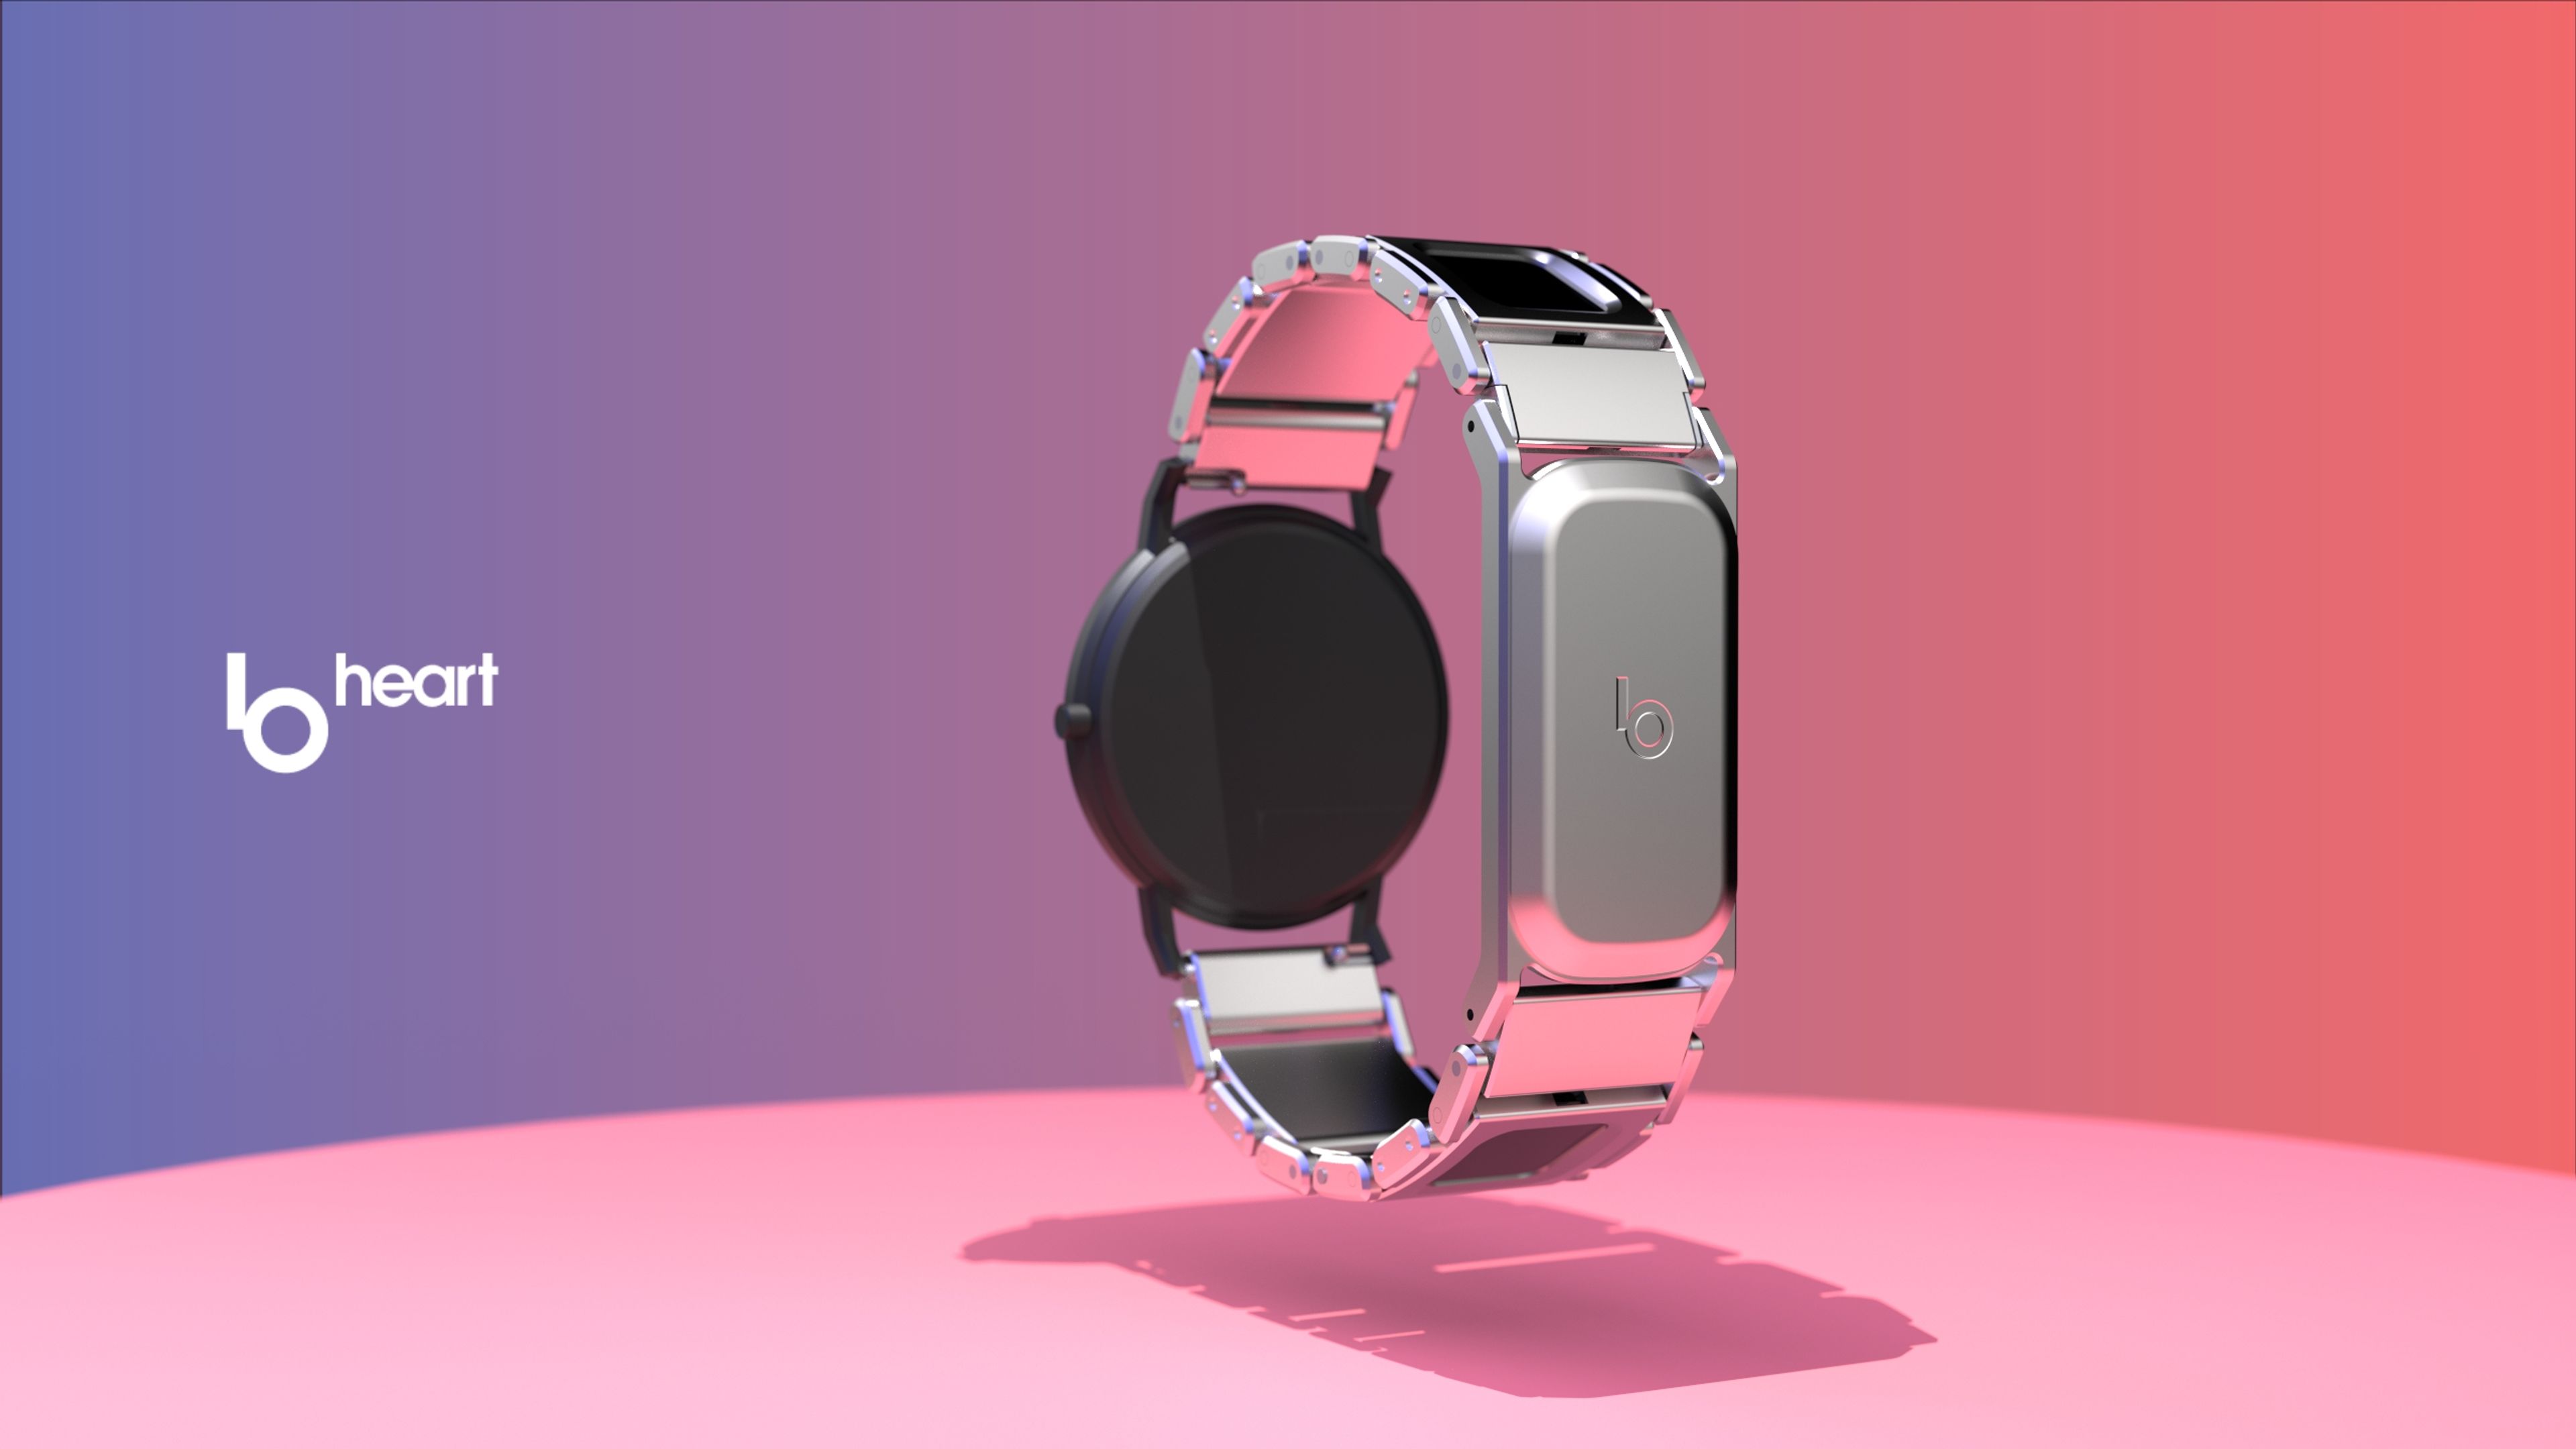 BHeart health wearable product image